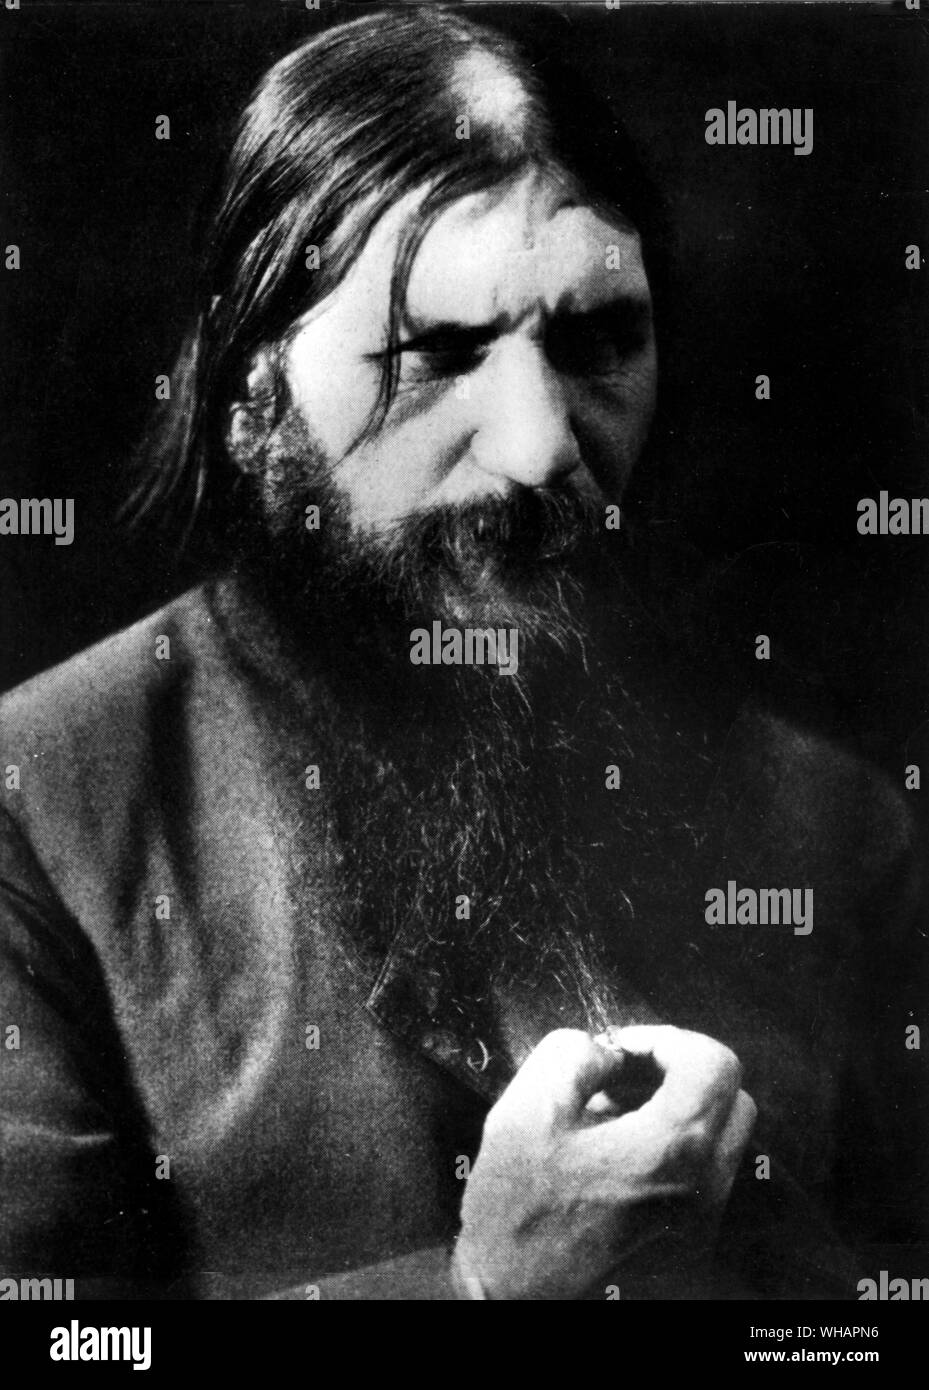 Rasputin. Grigori Efimovich. Grigori Efimovich Rasputin has been called a Russian mystic among other things, he was also call a Holy Devil by Iliodor (Sergei Trufanov) the monk-priest of Tsarytsin. Much which is known about the early life of Rasptin may be more legend than fact, because to the Russian peasants he was a hero, their man. One thing is certain, though, he was a product of his Siberian culture.. . Stock Photo